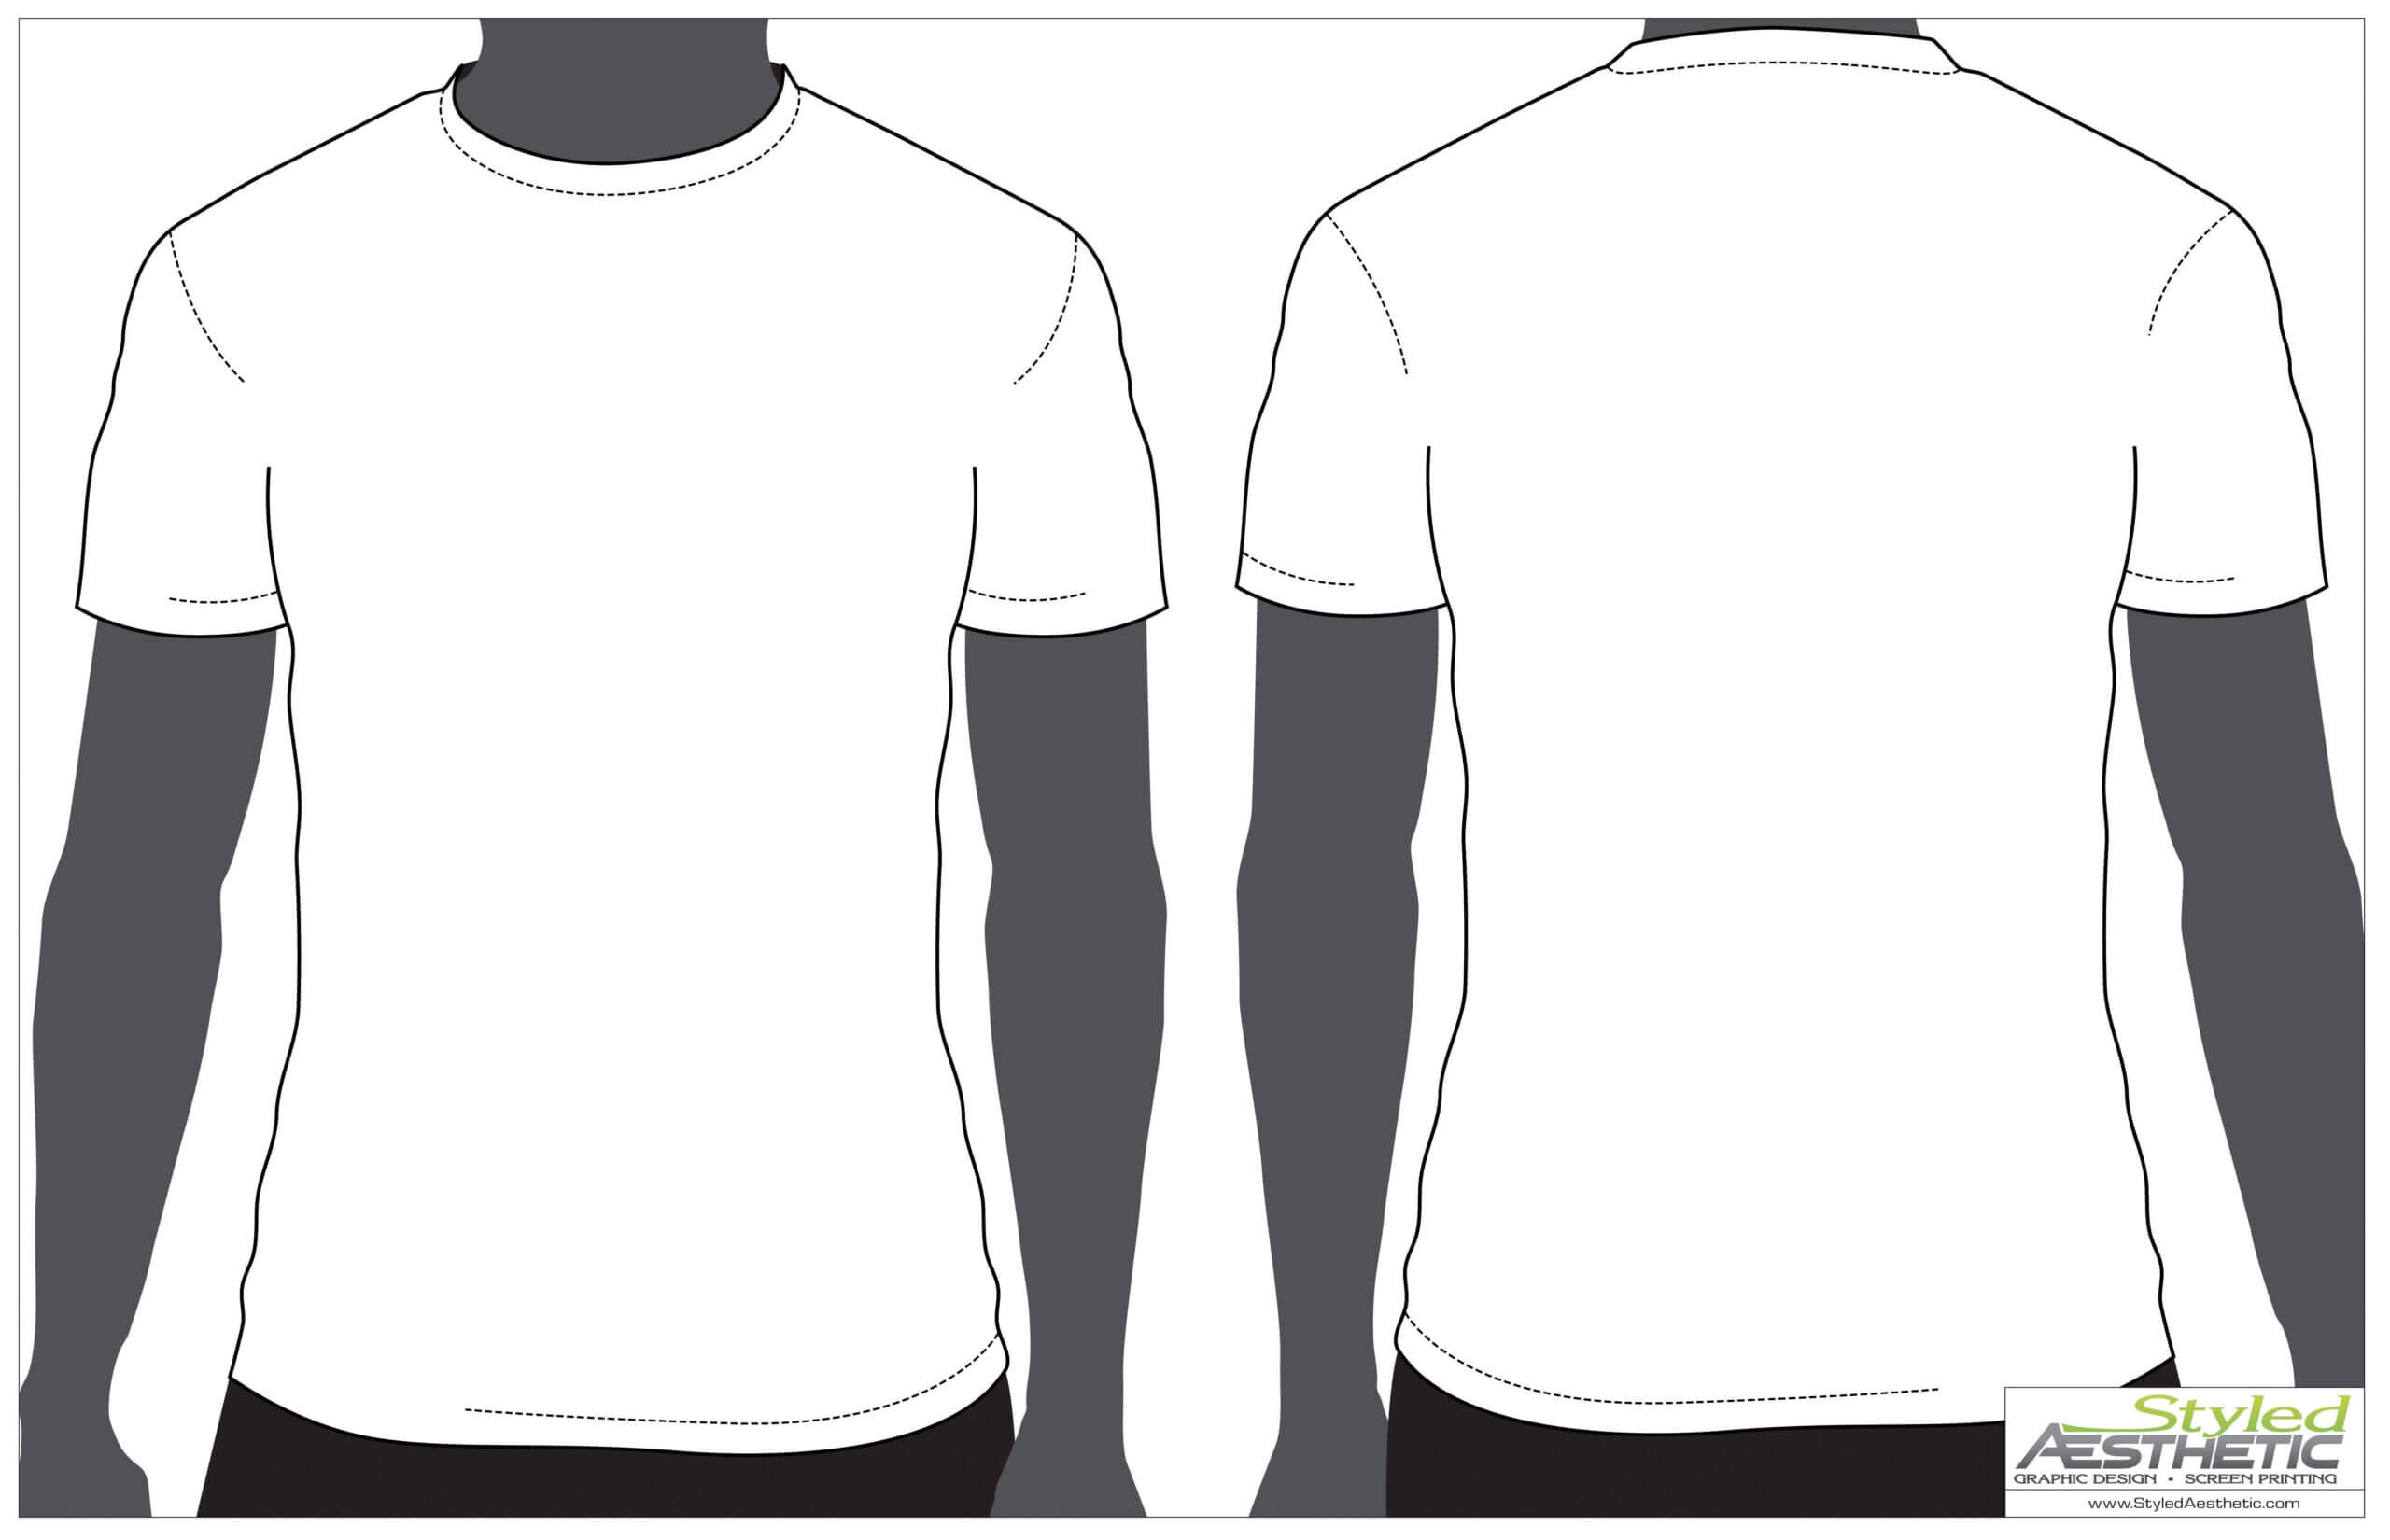 Blank T Shirt Outline | Free Download Best Blank T Shirt Intended For Blank T Shirt Design Template Psd